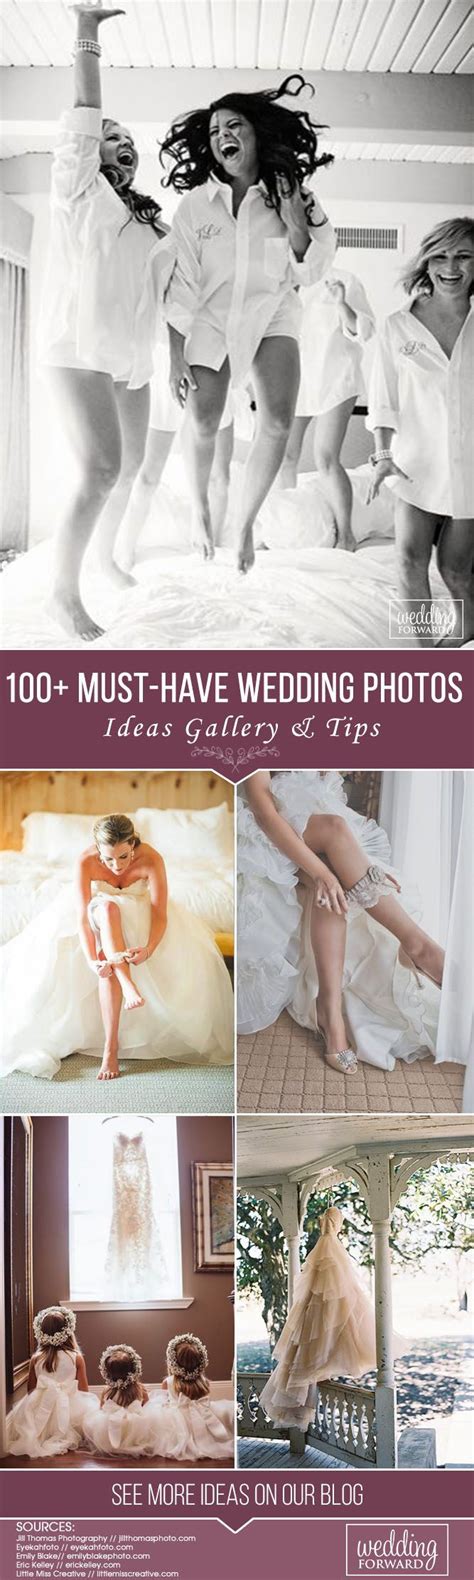 100 Must Have Wedding Photos Ideas Gallery And Tips Wedding Forward Wedding Photos Wedding